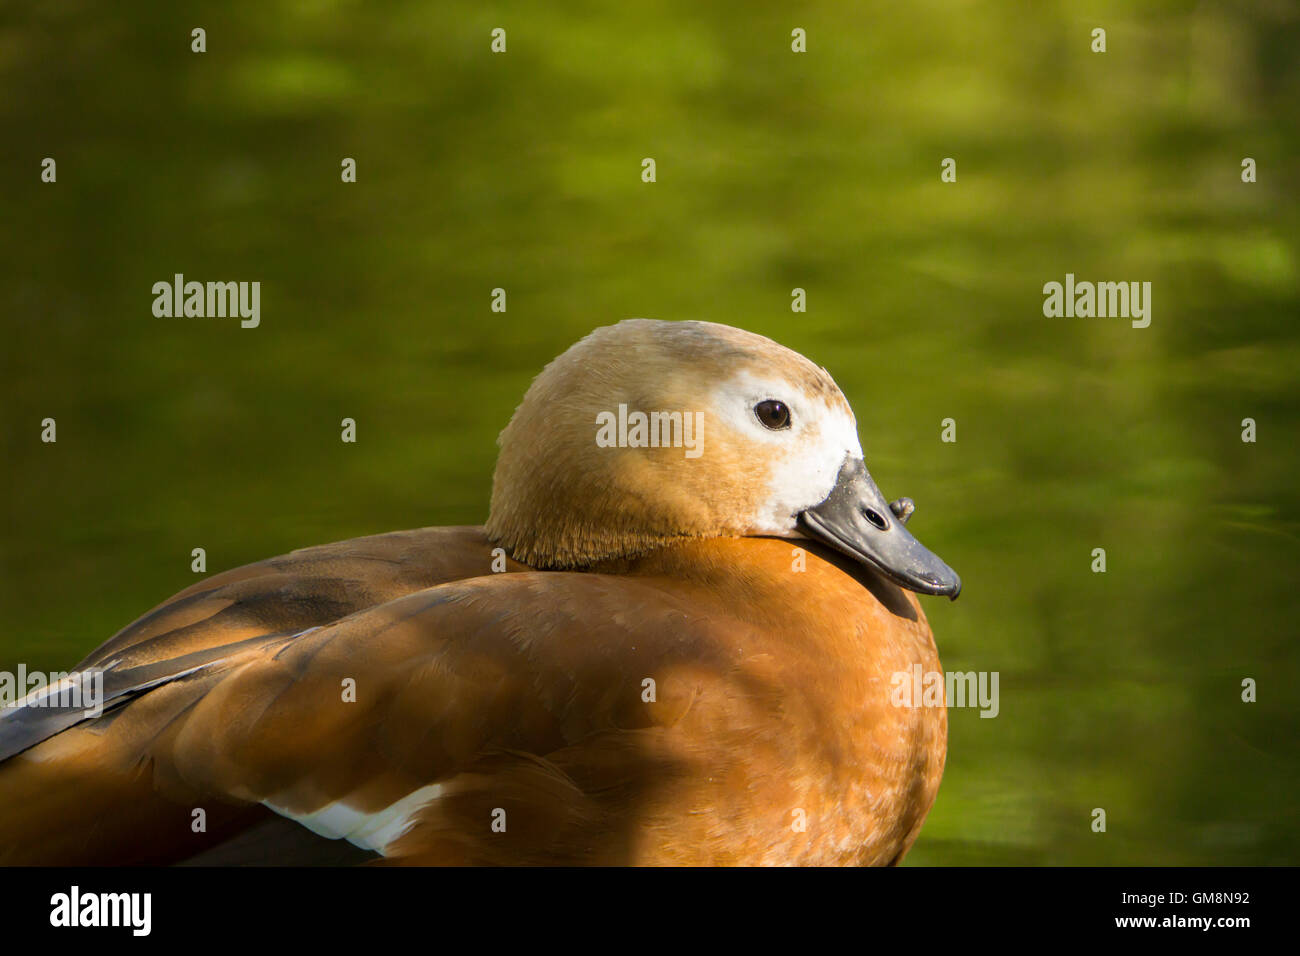 close up view of a brown duck Stock Photo